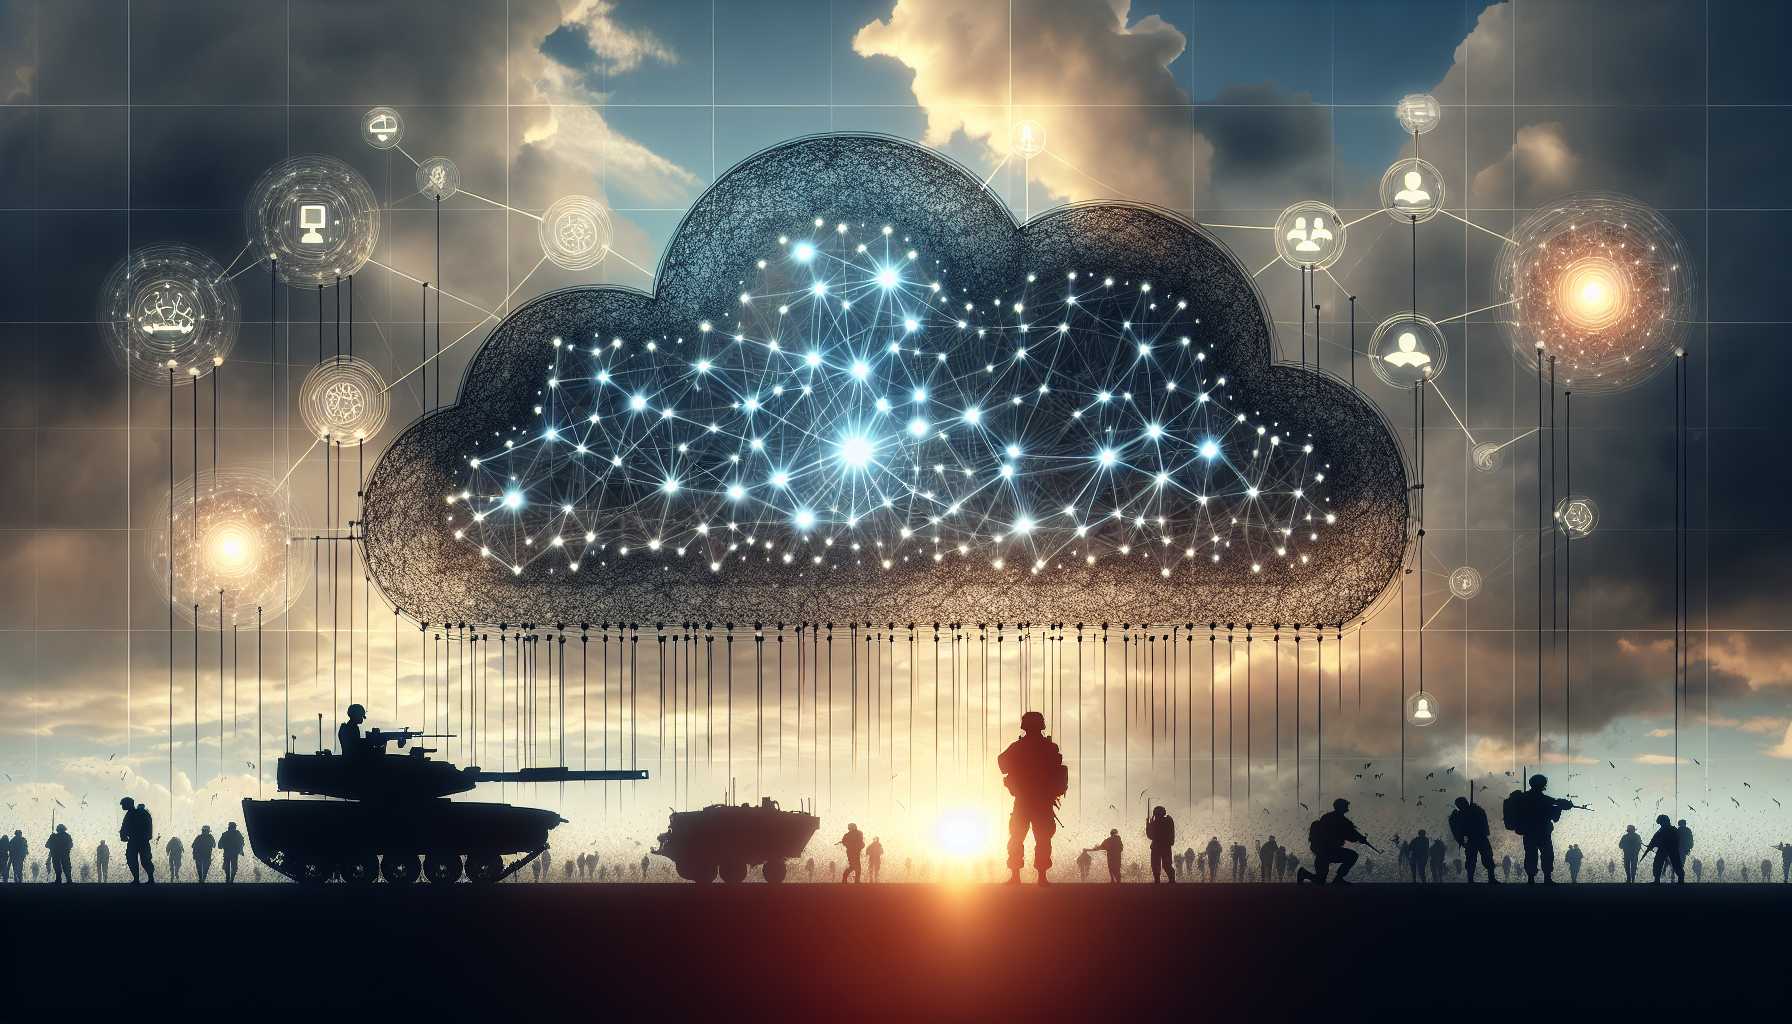 A conceptual image of cloud computing, AI neural networks, and military silhouettes indicating dilemma in tech warfare